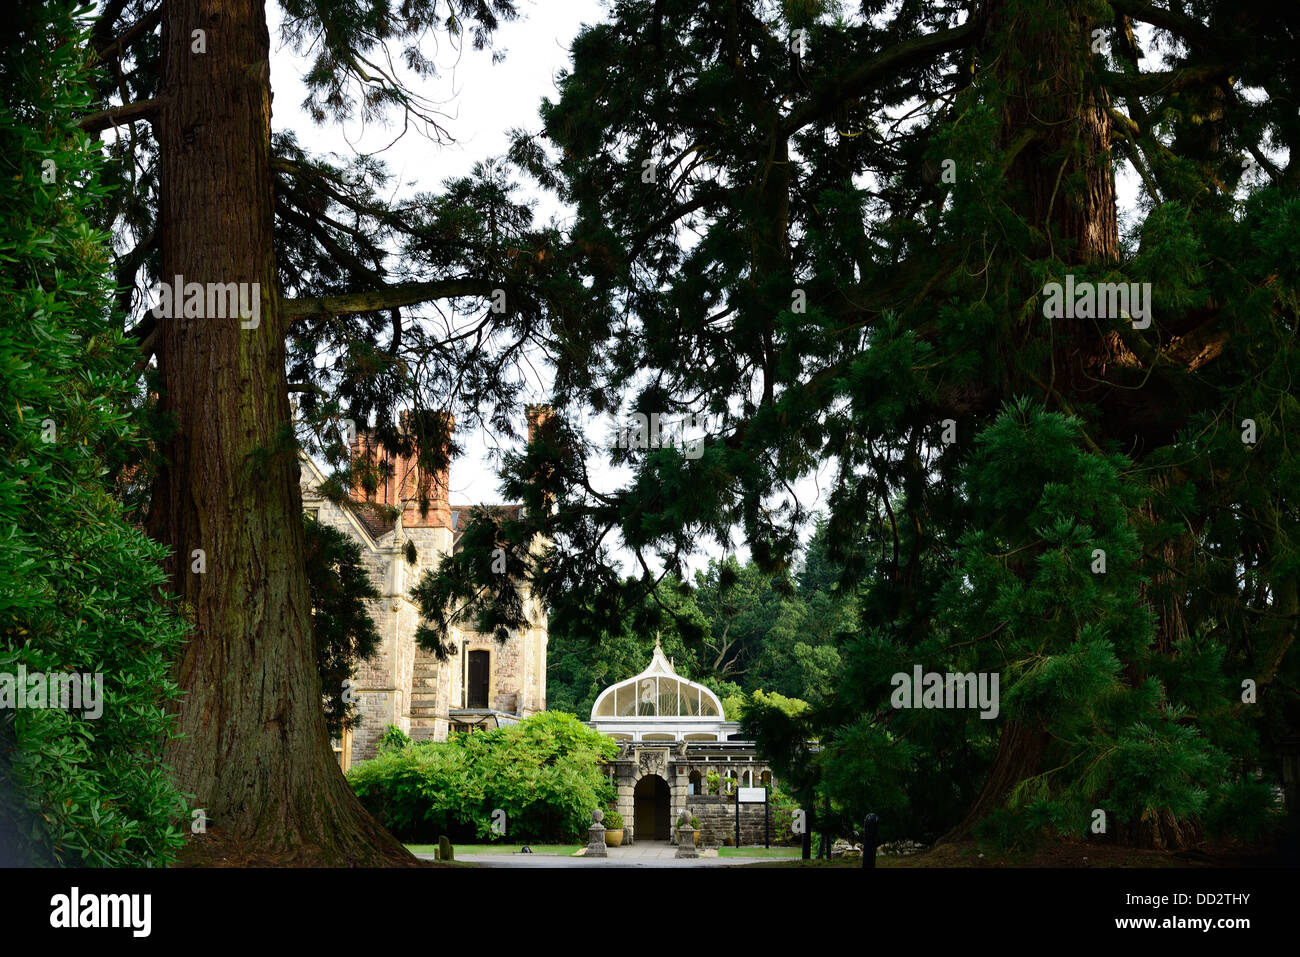 View through the trees looking at a country house Stock Photo